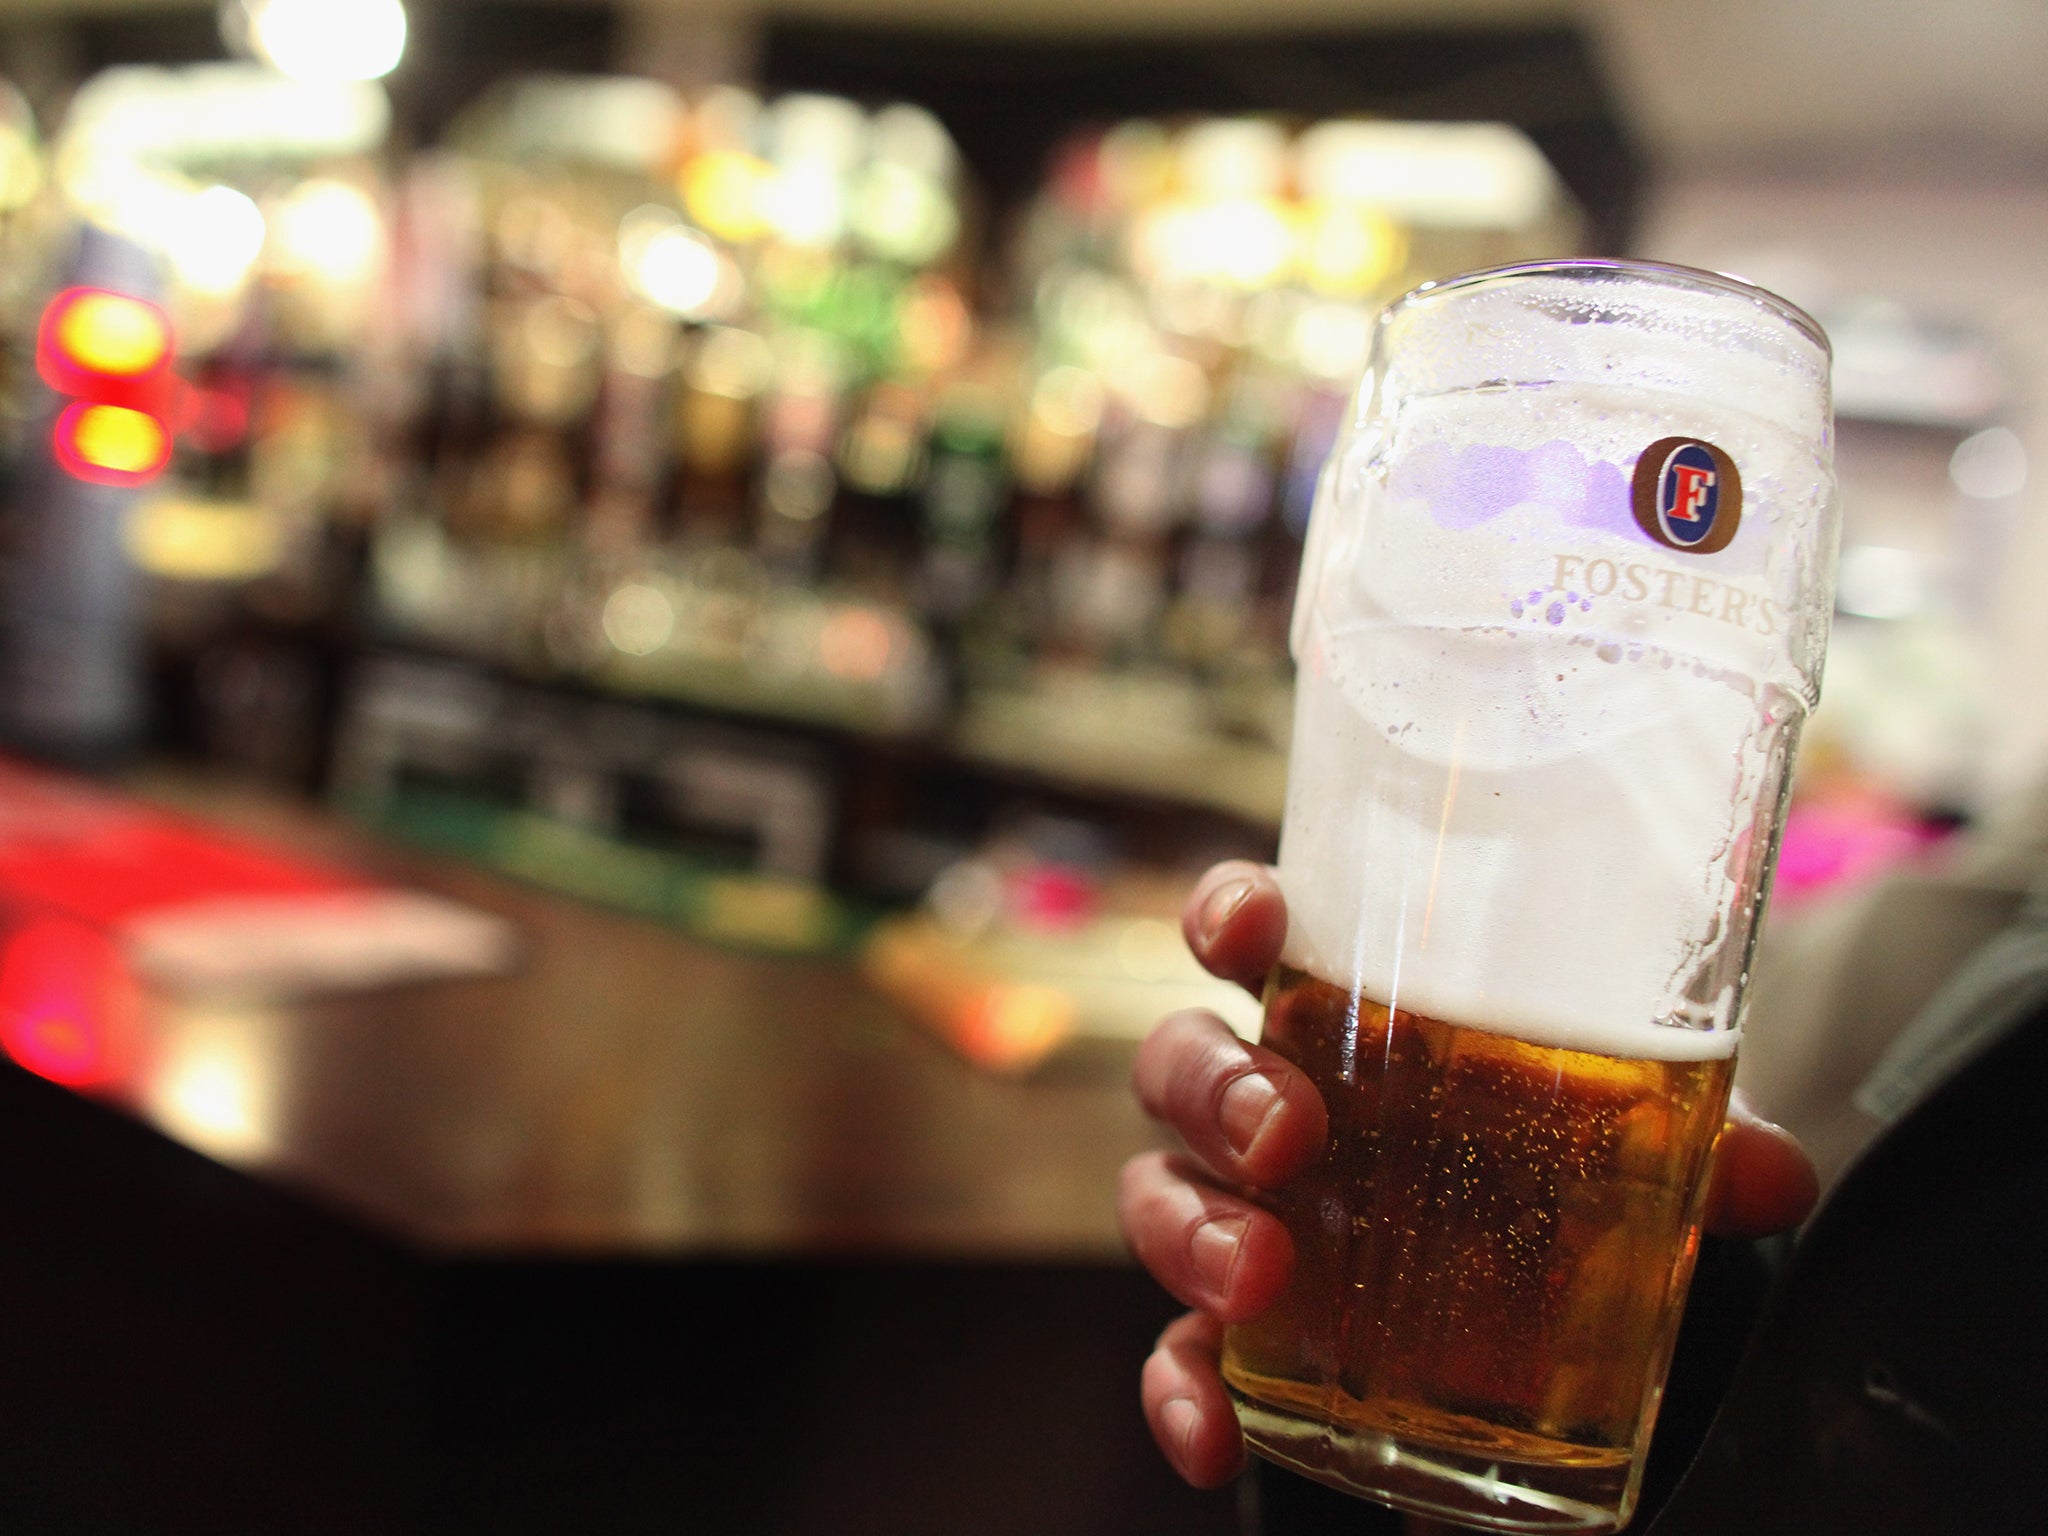 Enterprise Inns sees net income grow by 1.6%